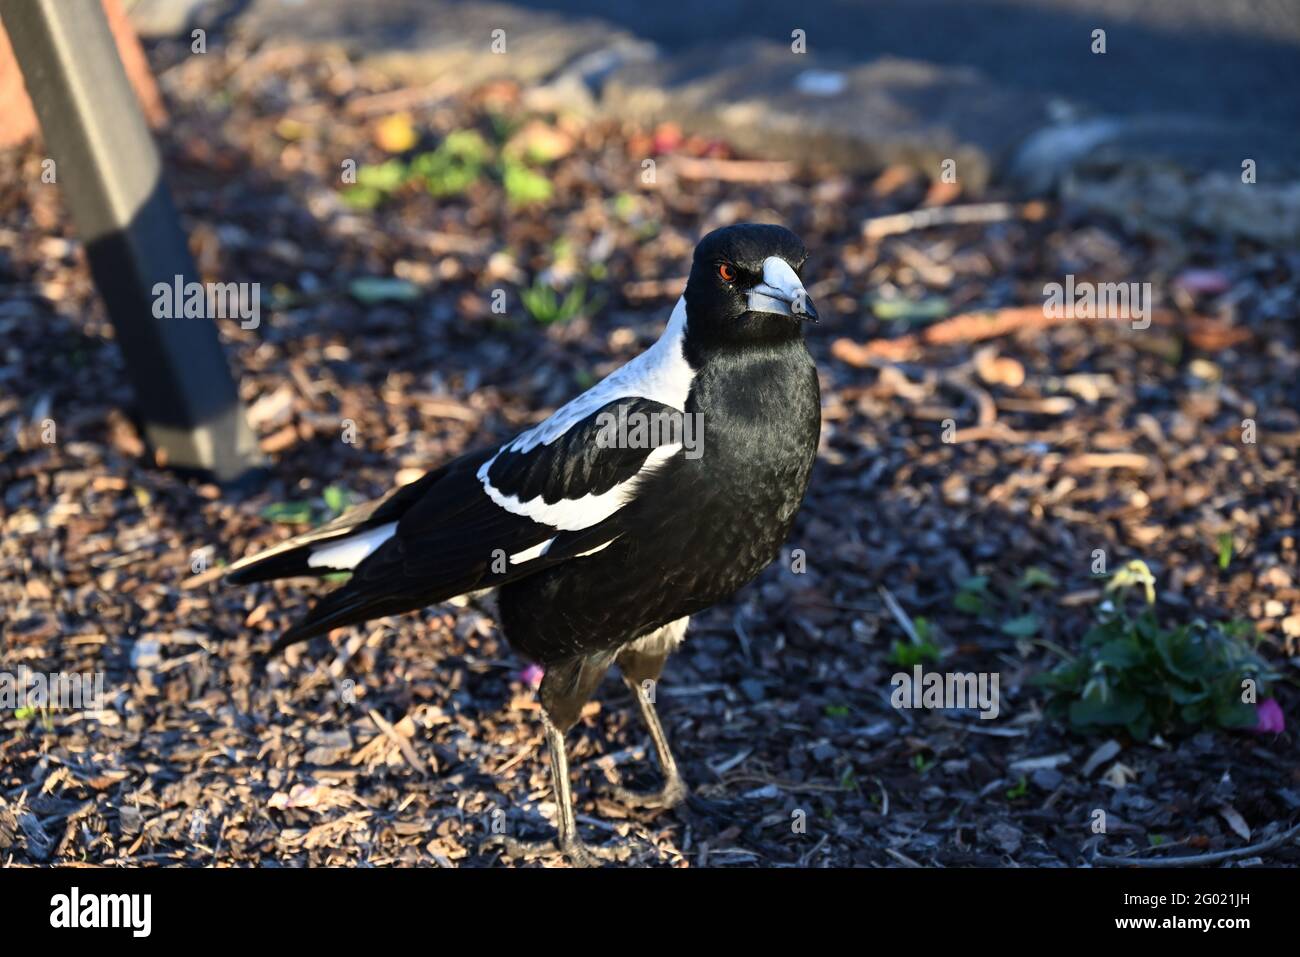 Closeup of an Australian magpie standing in the middle of a garden bed at dusk Stock Photo